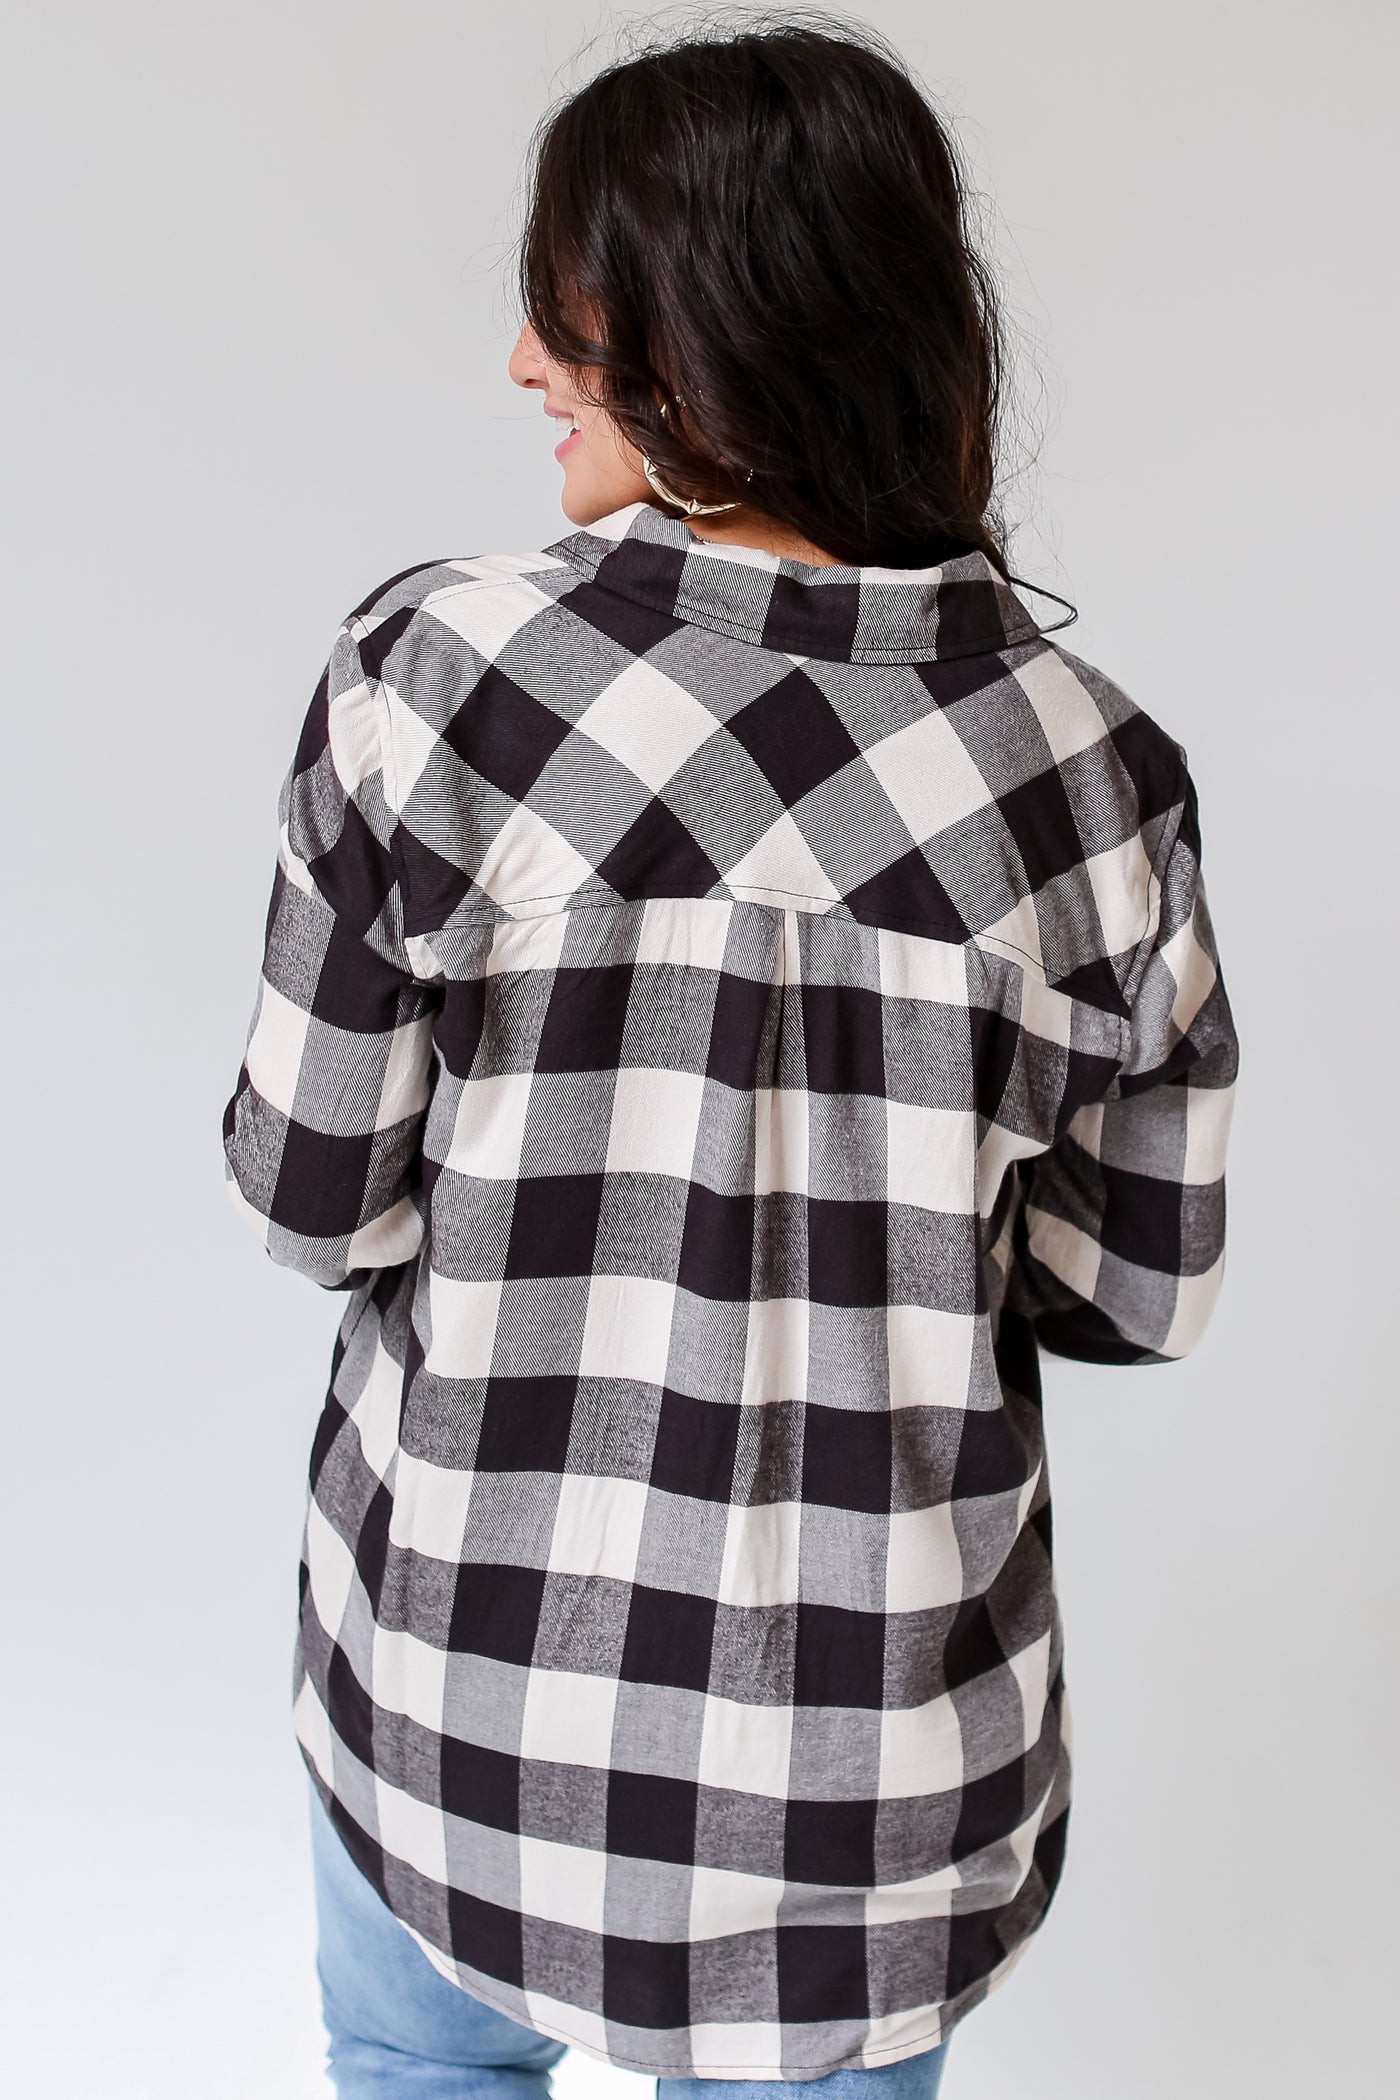 white and black flannel back view